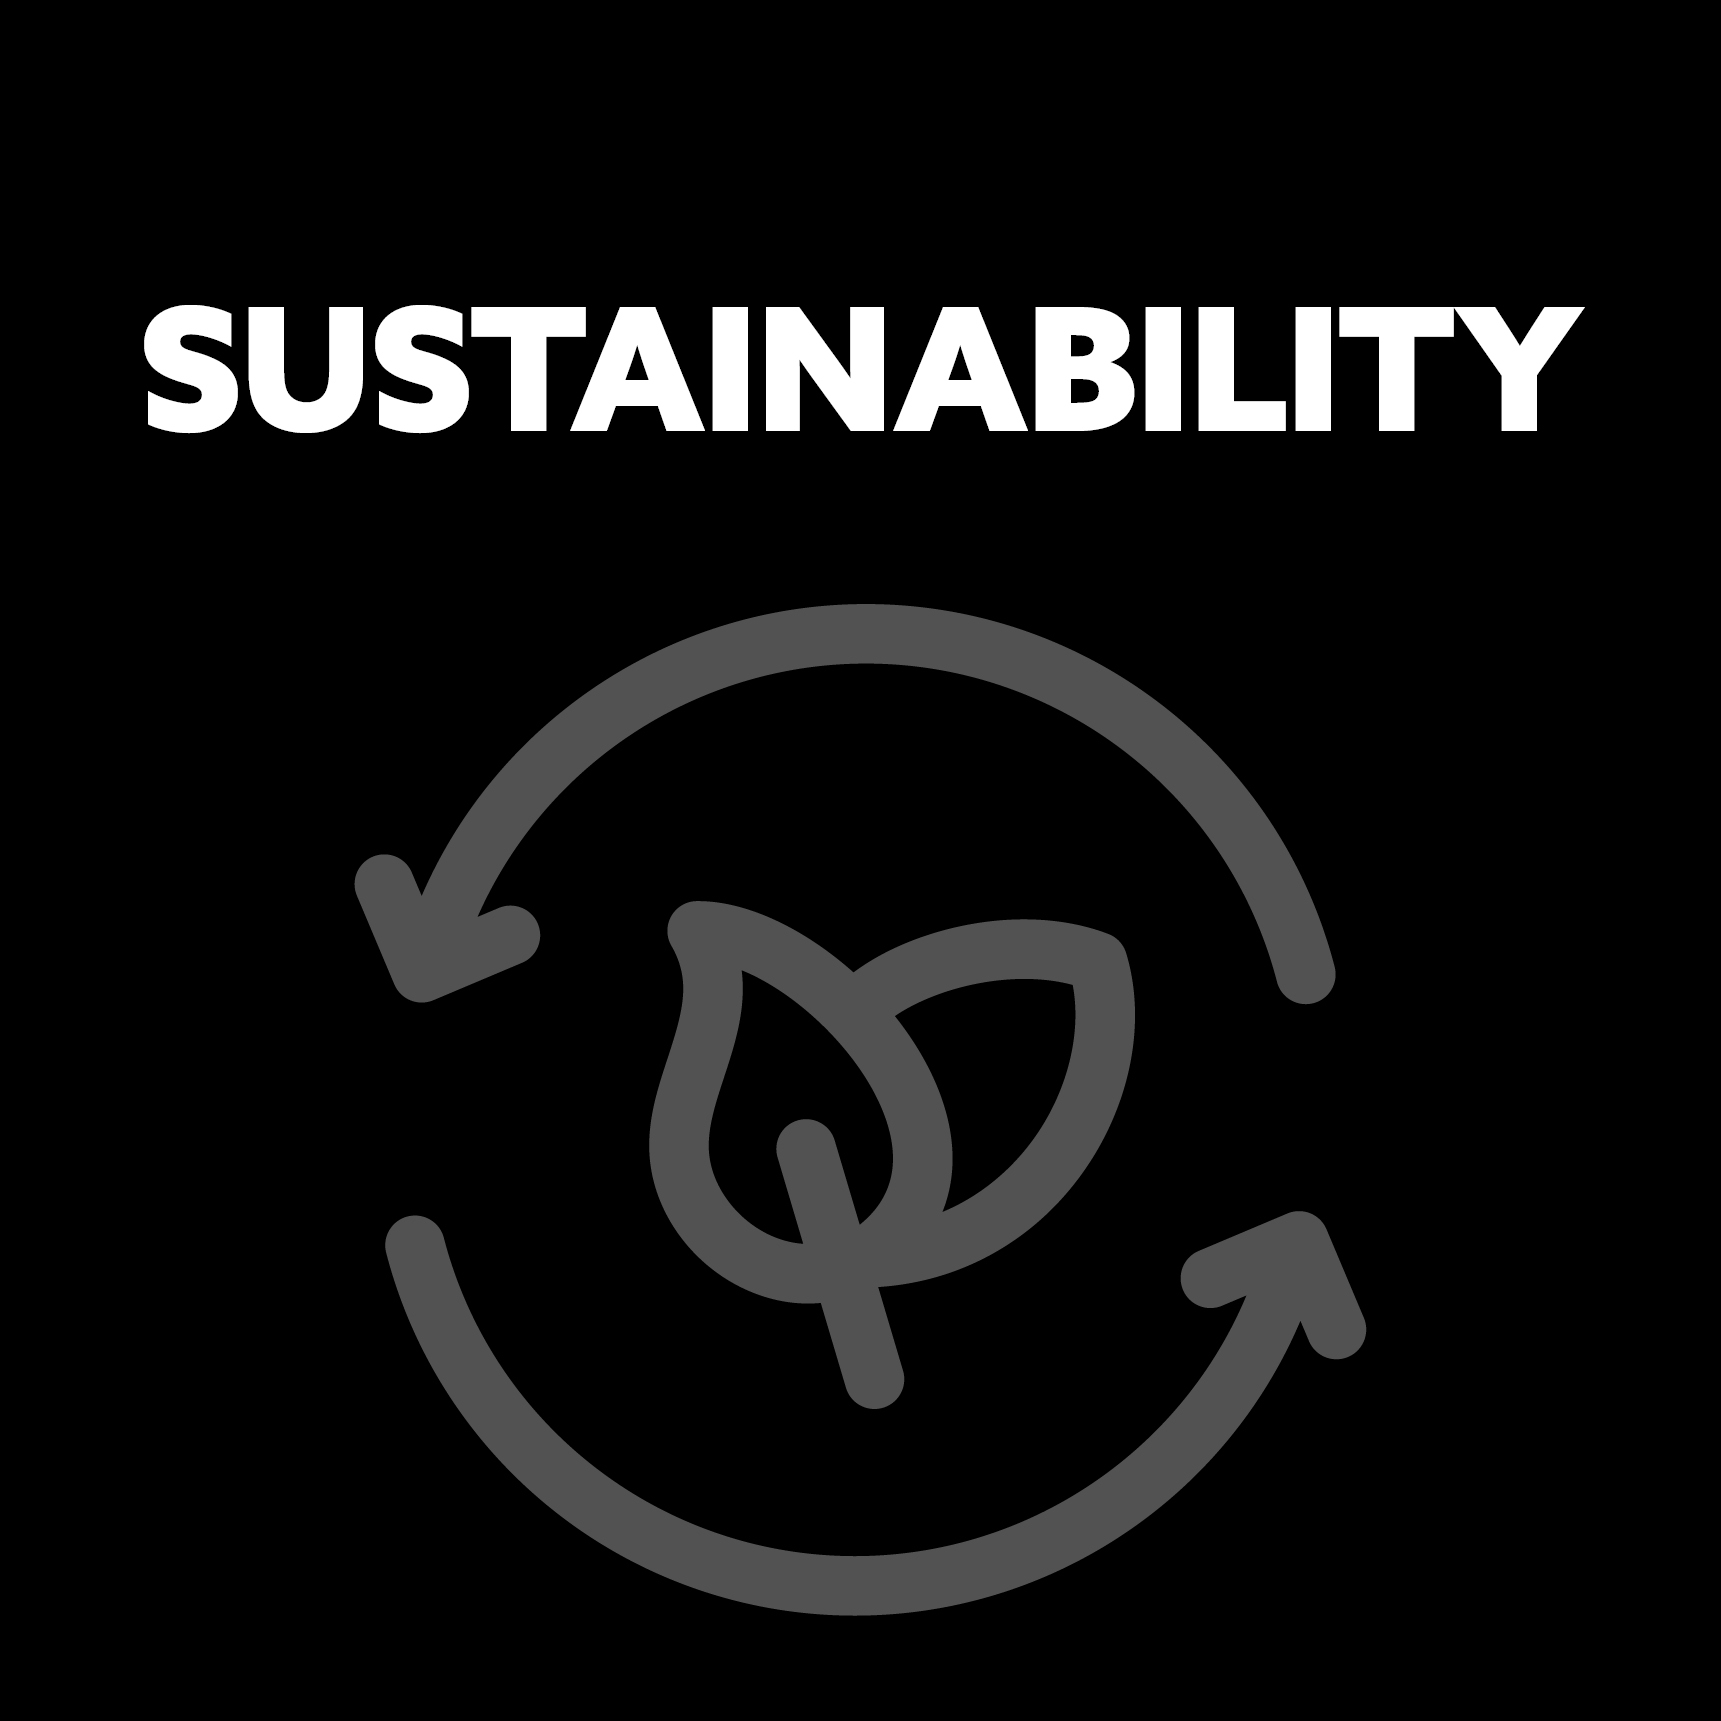 Sustainability its in everything we do